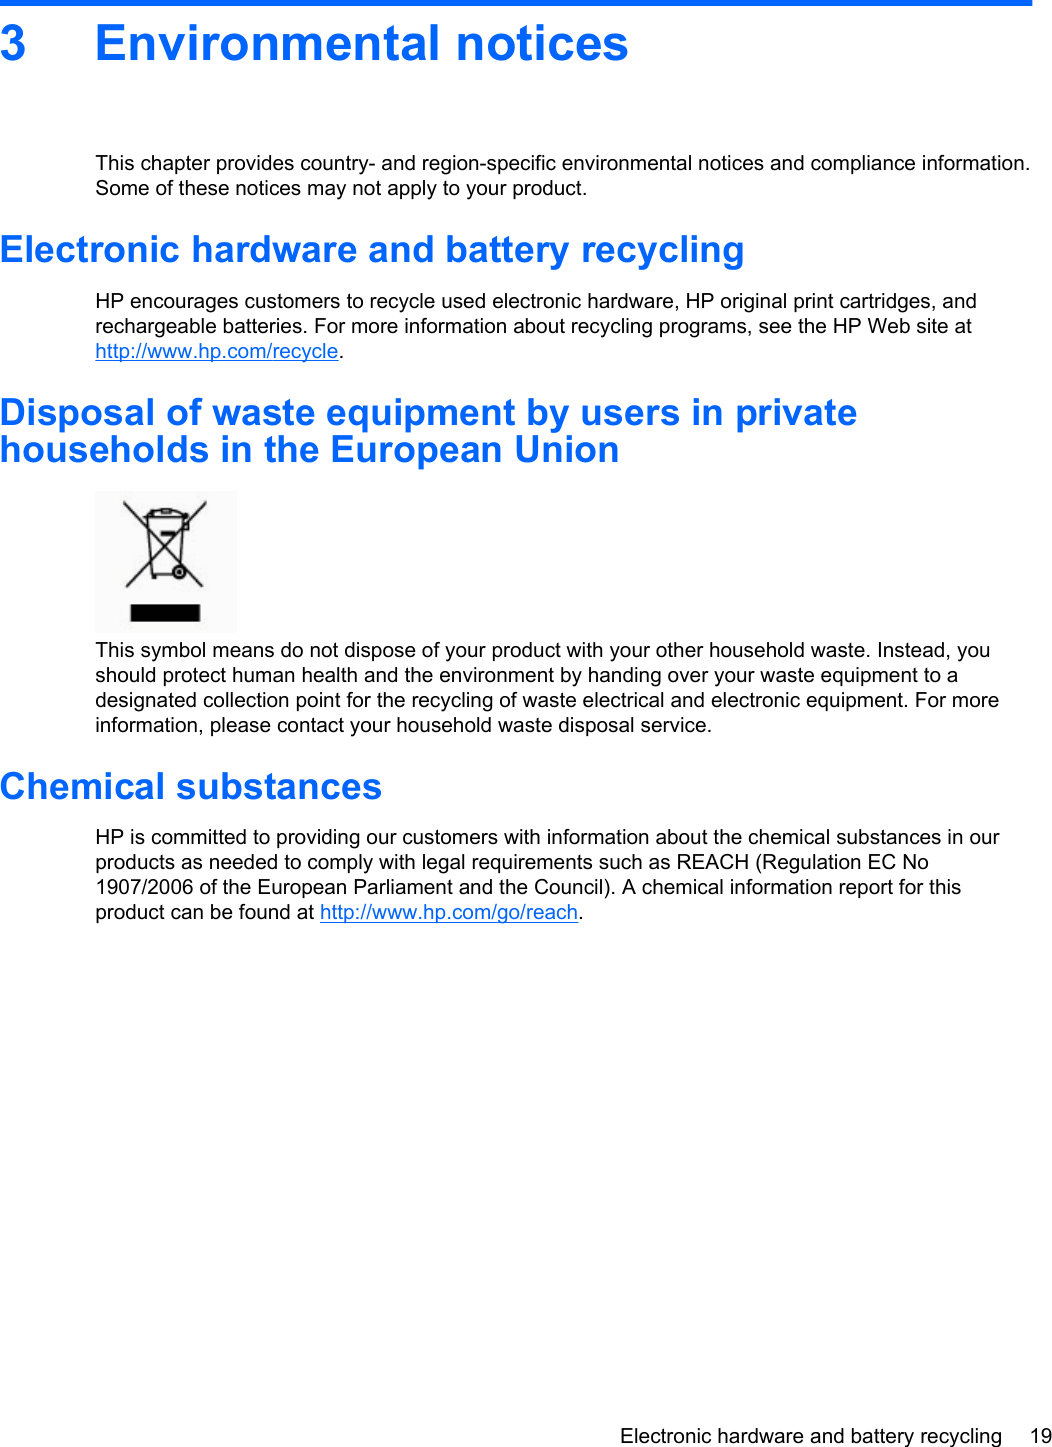 3 Environmental noticesThis chapter provides country- and region-specific environmental notices and compliance information.Some of these notices may not apply to your product.Electronic hardware and battery recyclingHP encourages customers to recycle used electronic hardware, HP original print cartridges, andrechargeable batteries. For more information about recycling programs, see the HP Web site athttp://www.hp.com/recycle.Disposal of waste equipment by users in privatehouseholds in the European UnionThis symbol means do not dispose of your product with your other household waste. Instead, youshould protect human health and the environment by handing over your waste equipment to adesignated collection point for the recycling of waste electrical and electronic equipment. For moreinformation, please contact your household waste disposal service.Chemical substancesHP is committed to providing our customers with information about the chemical substances in ourproducts as needed to comply with legal requirements such as REACH (Regulation EC No1907/2006 of the European Parliament and the Council). A chemical information report for thisproduct can be found at http://www.hp.com/go/reach.Electronic hardware and battery recycling 19